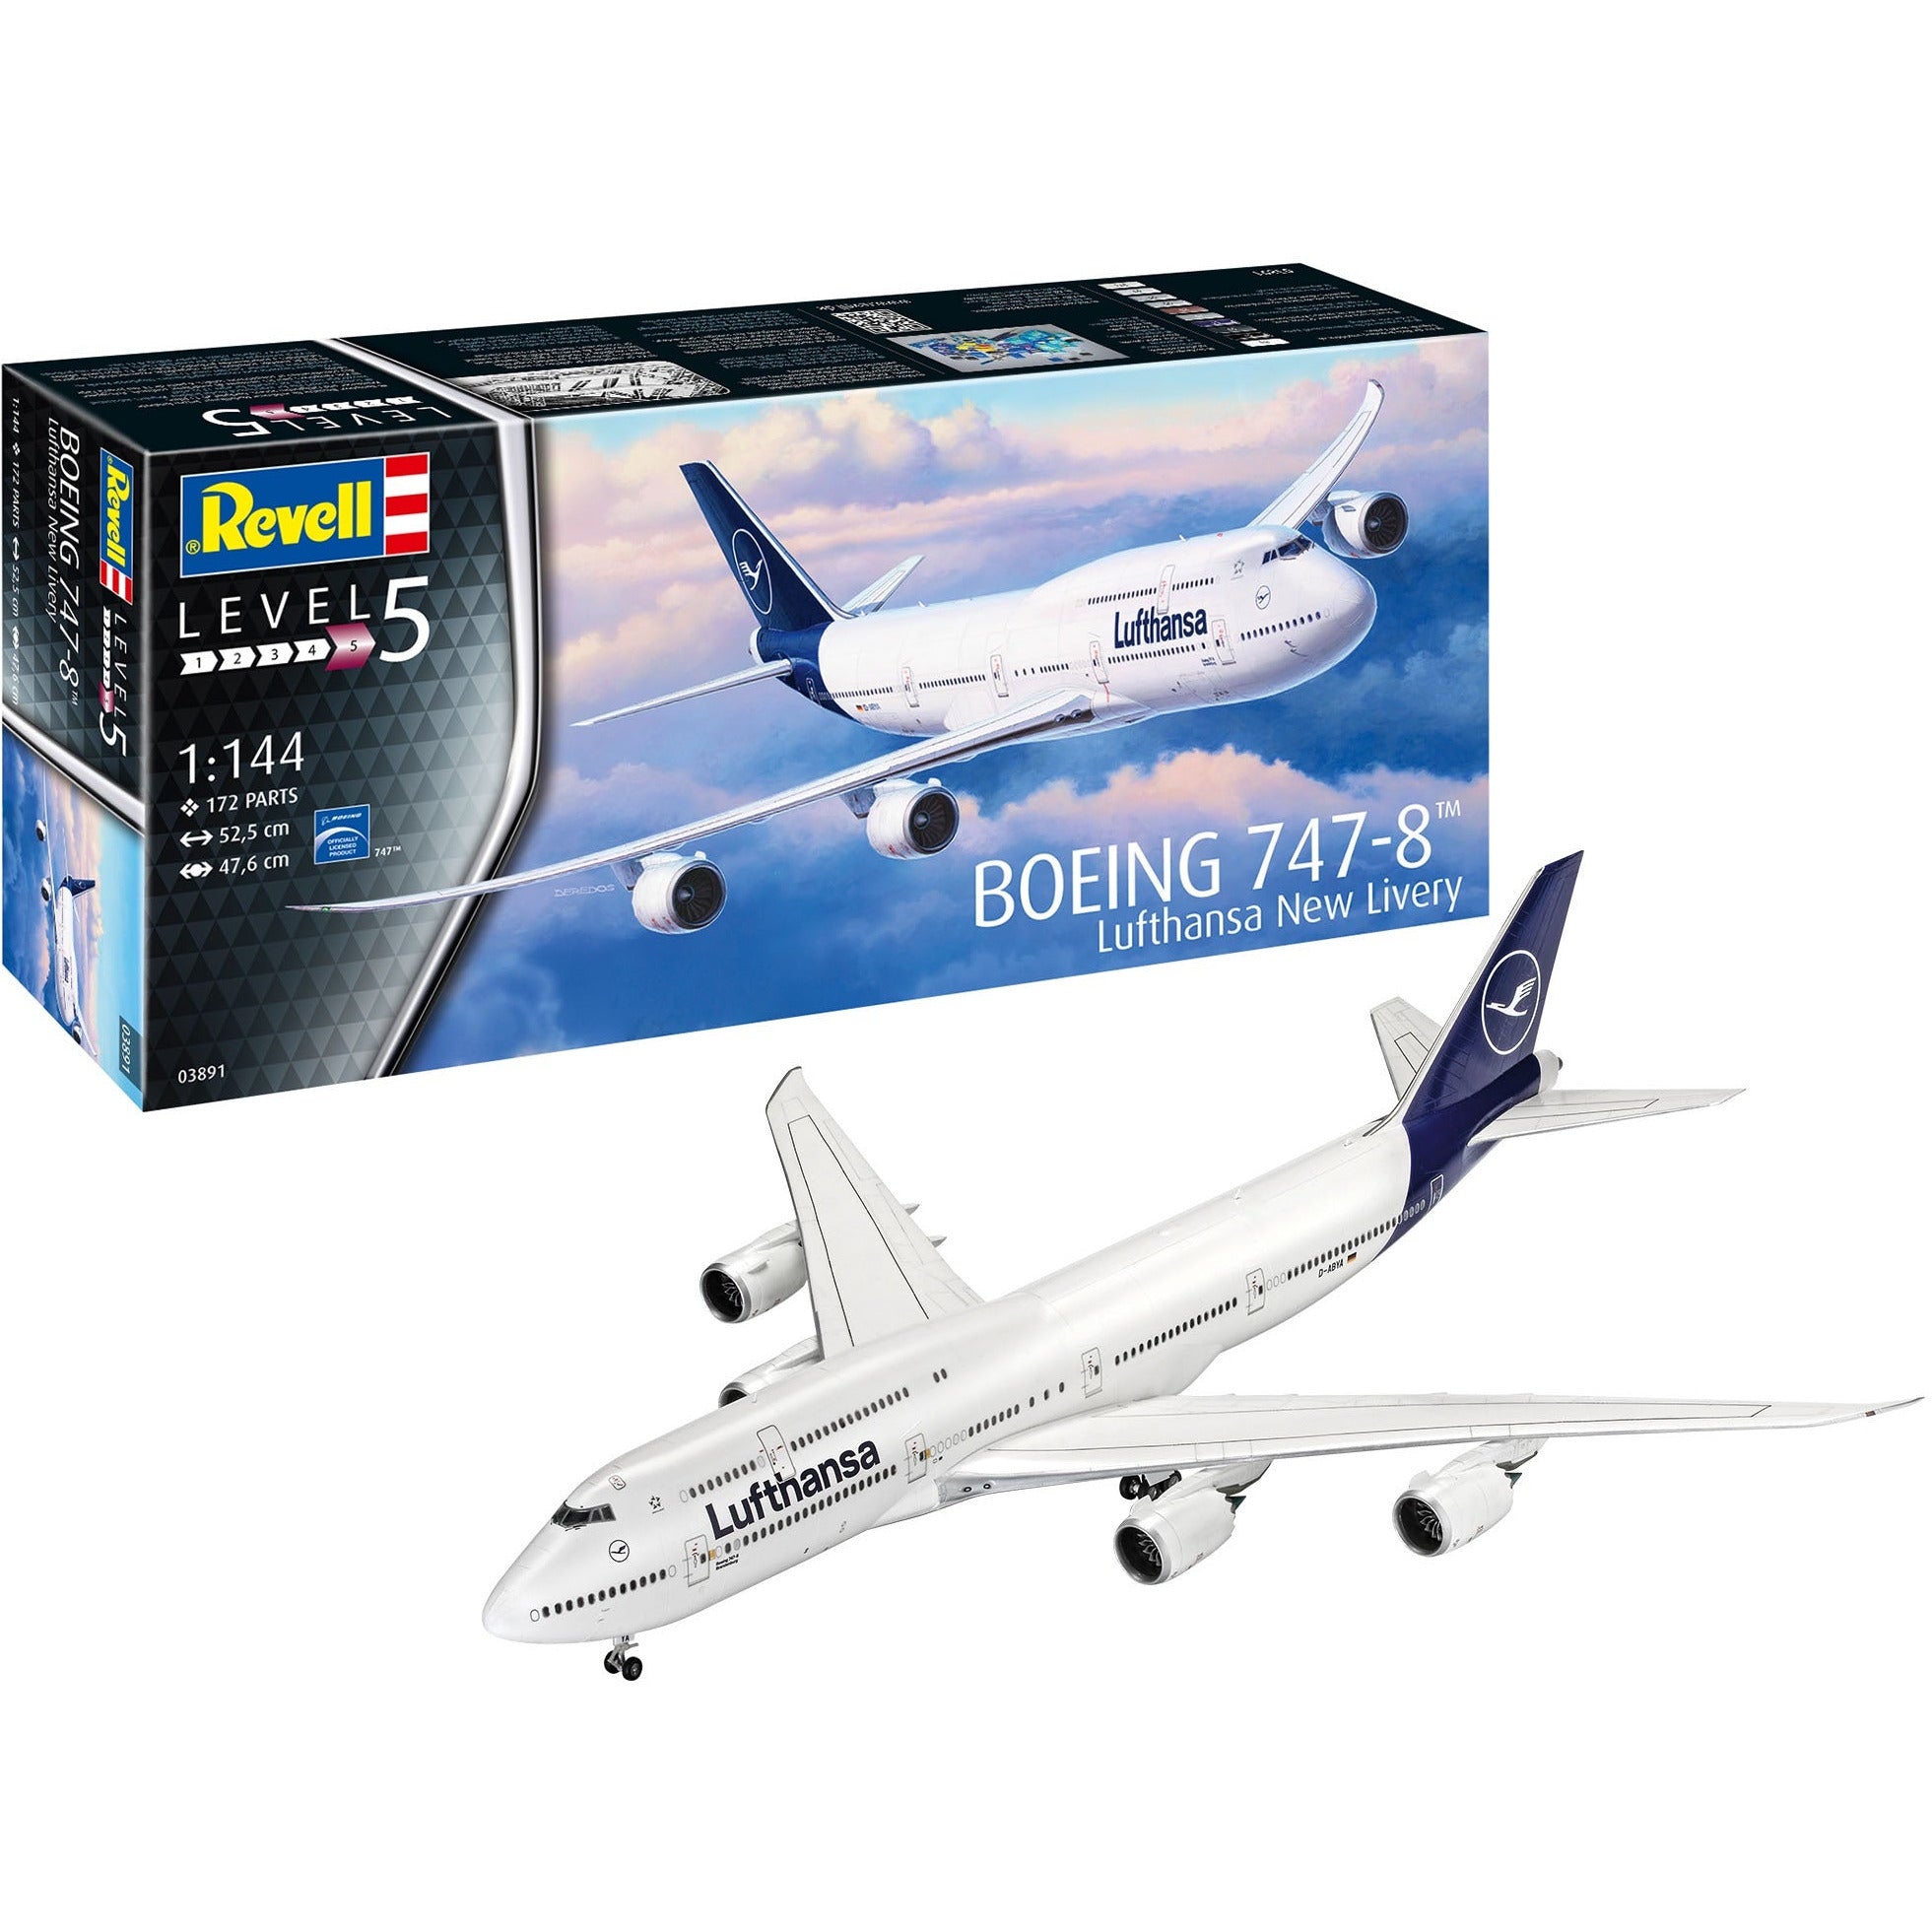 Boeing 747-8 Lufthansa 1/144 #03891 by Revell